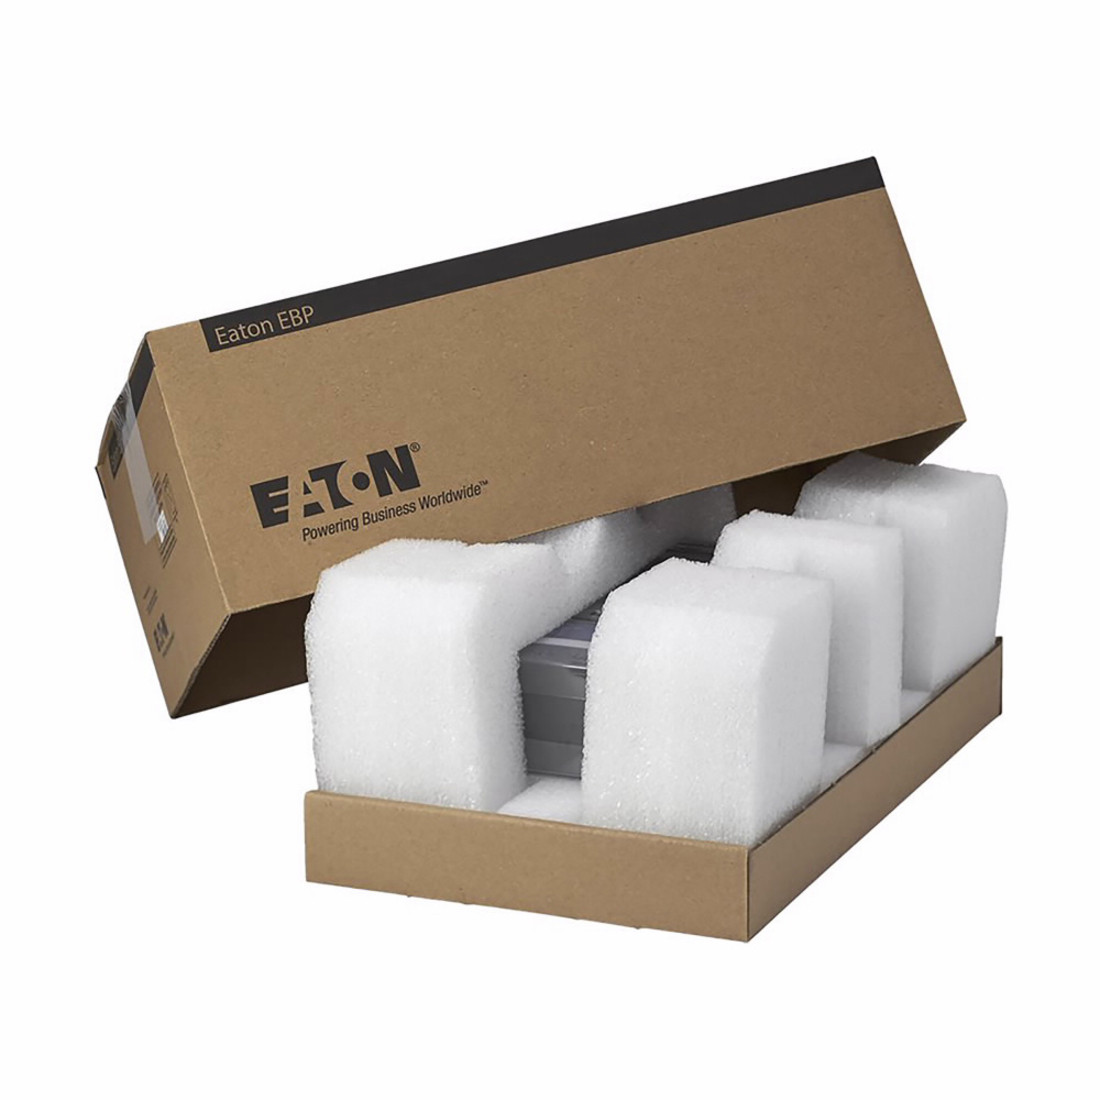 Eaton 5P/5PX replacement battery pack, Used with 5P3000, 5P3000RT, 5PX3000RT2U, 5PX3000RT2US, 5PX3000iRT2U, 5PX3000iRTN, 5PX3000RTN Single-phas… EBP-1003